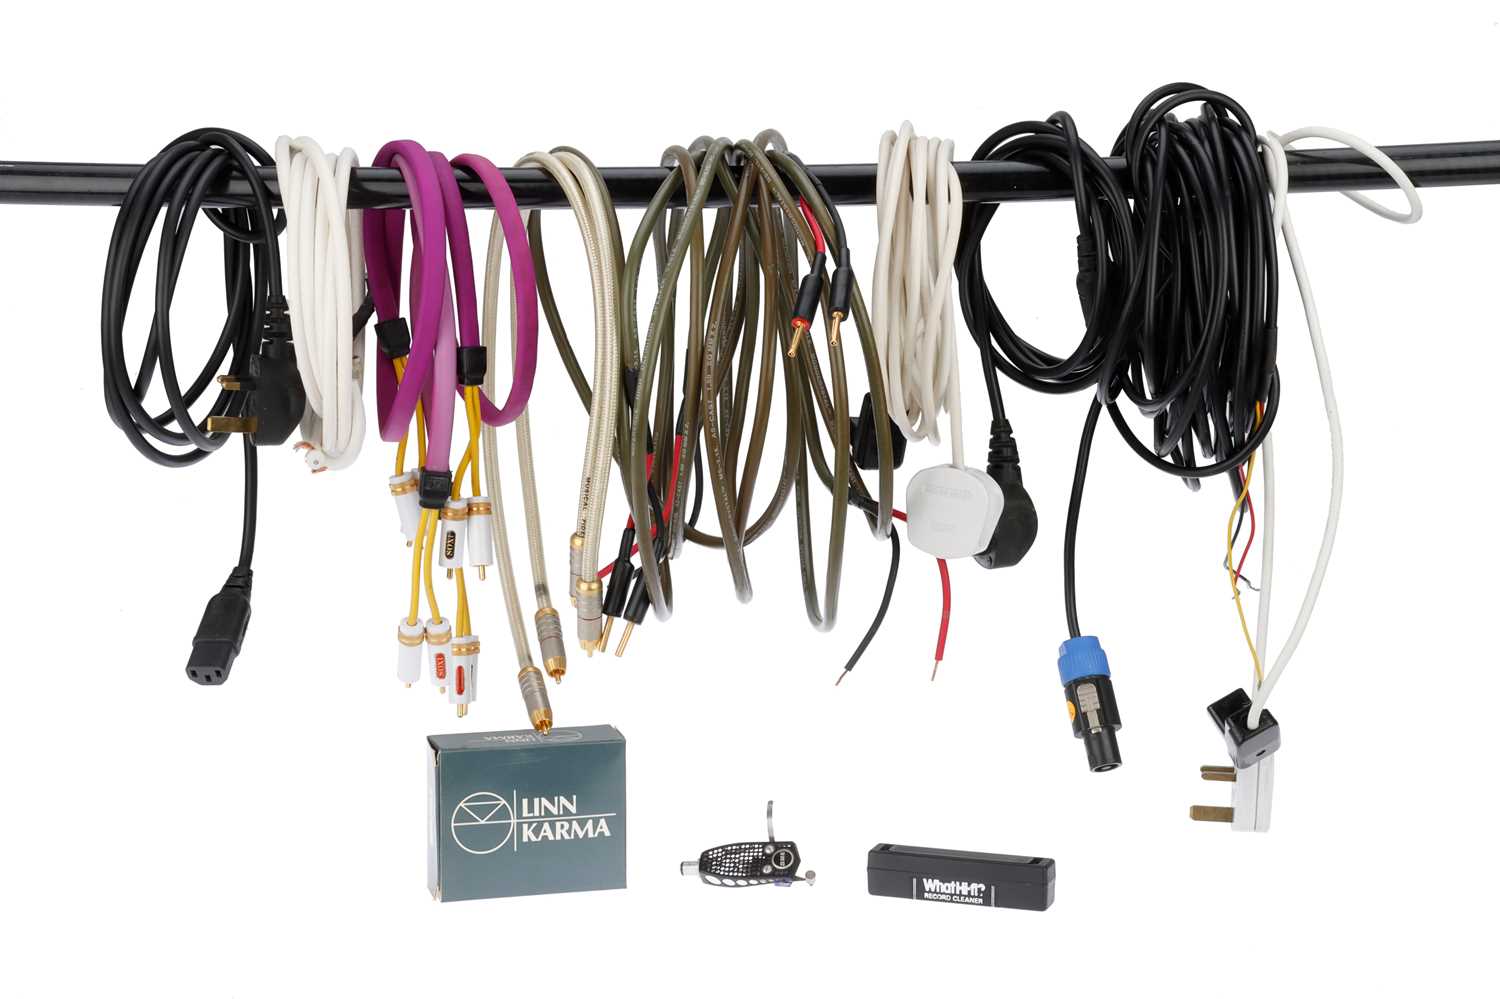 Lot 38 - A Selection of Various HiFi Cables